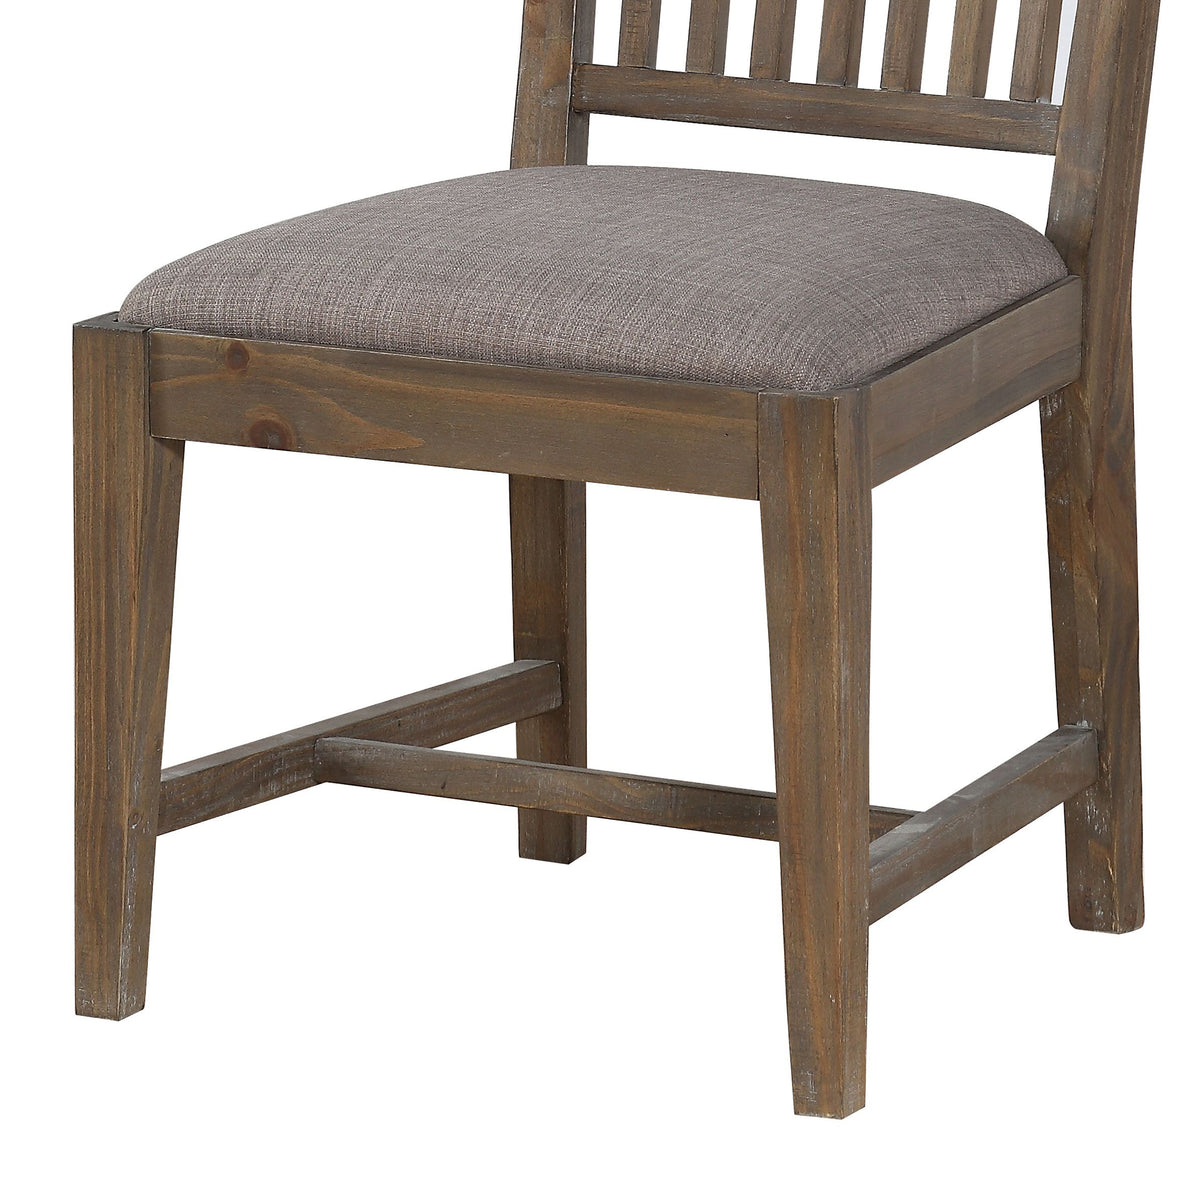 Wooden Chair with Fabric Upholstered Seat and Slat Style Back, Set of 2, Oak Brown and Gray - BM187606